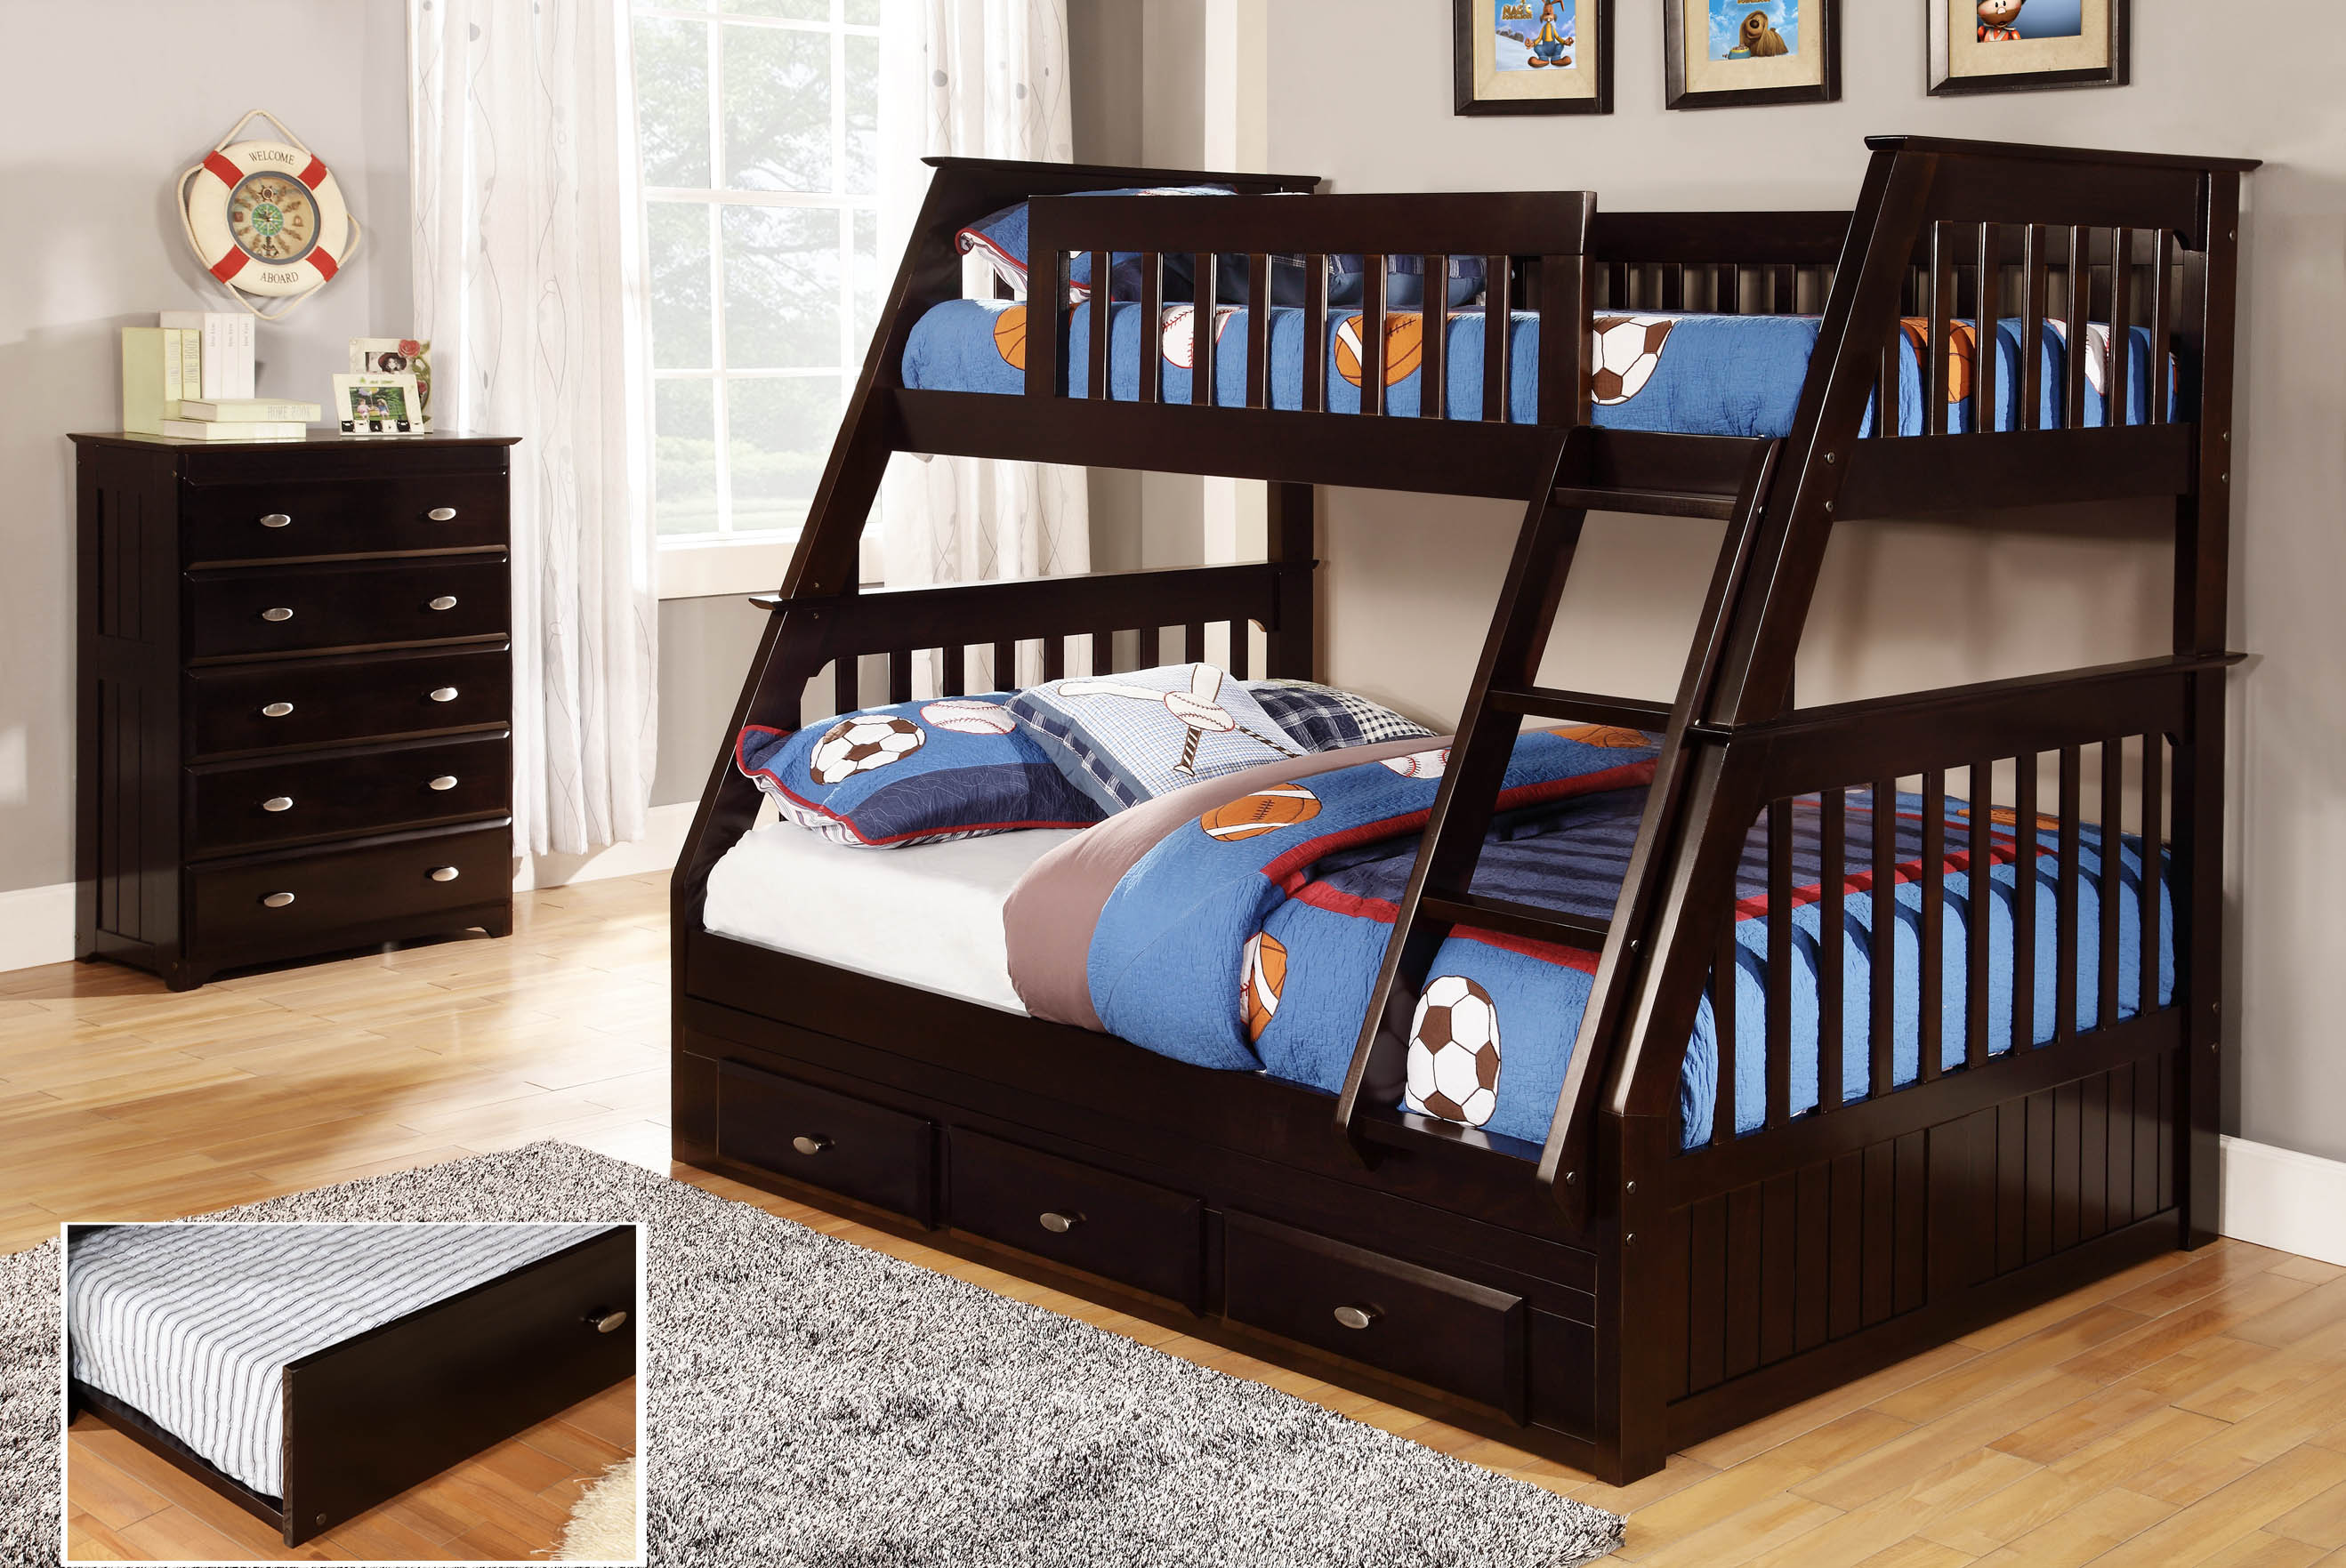 Espresso Mission Bunk Bed Kfs S, Discovery World Furniture Honey Twin Over Full Staircase Bunk Bed